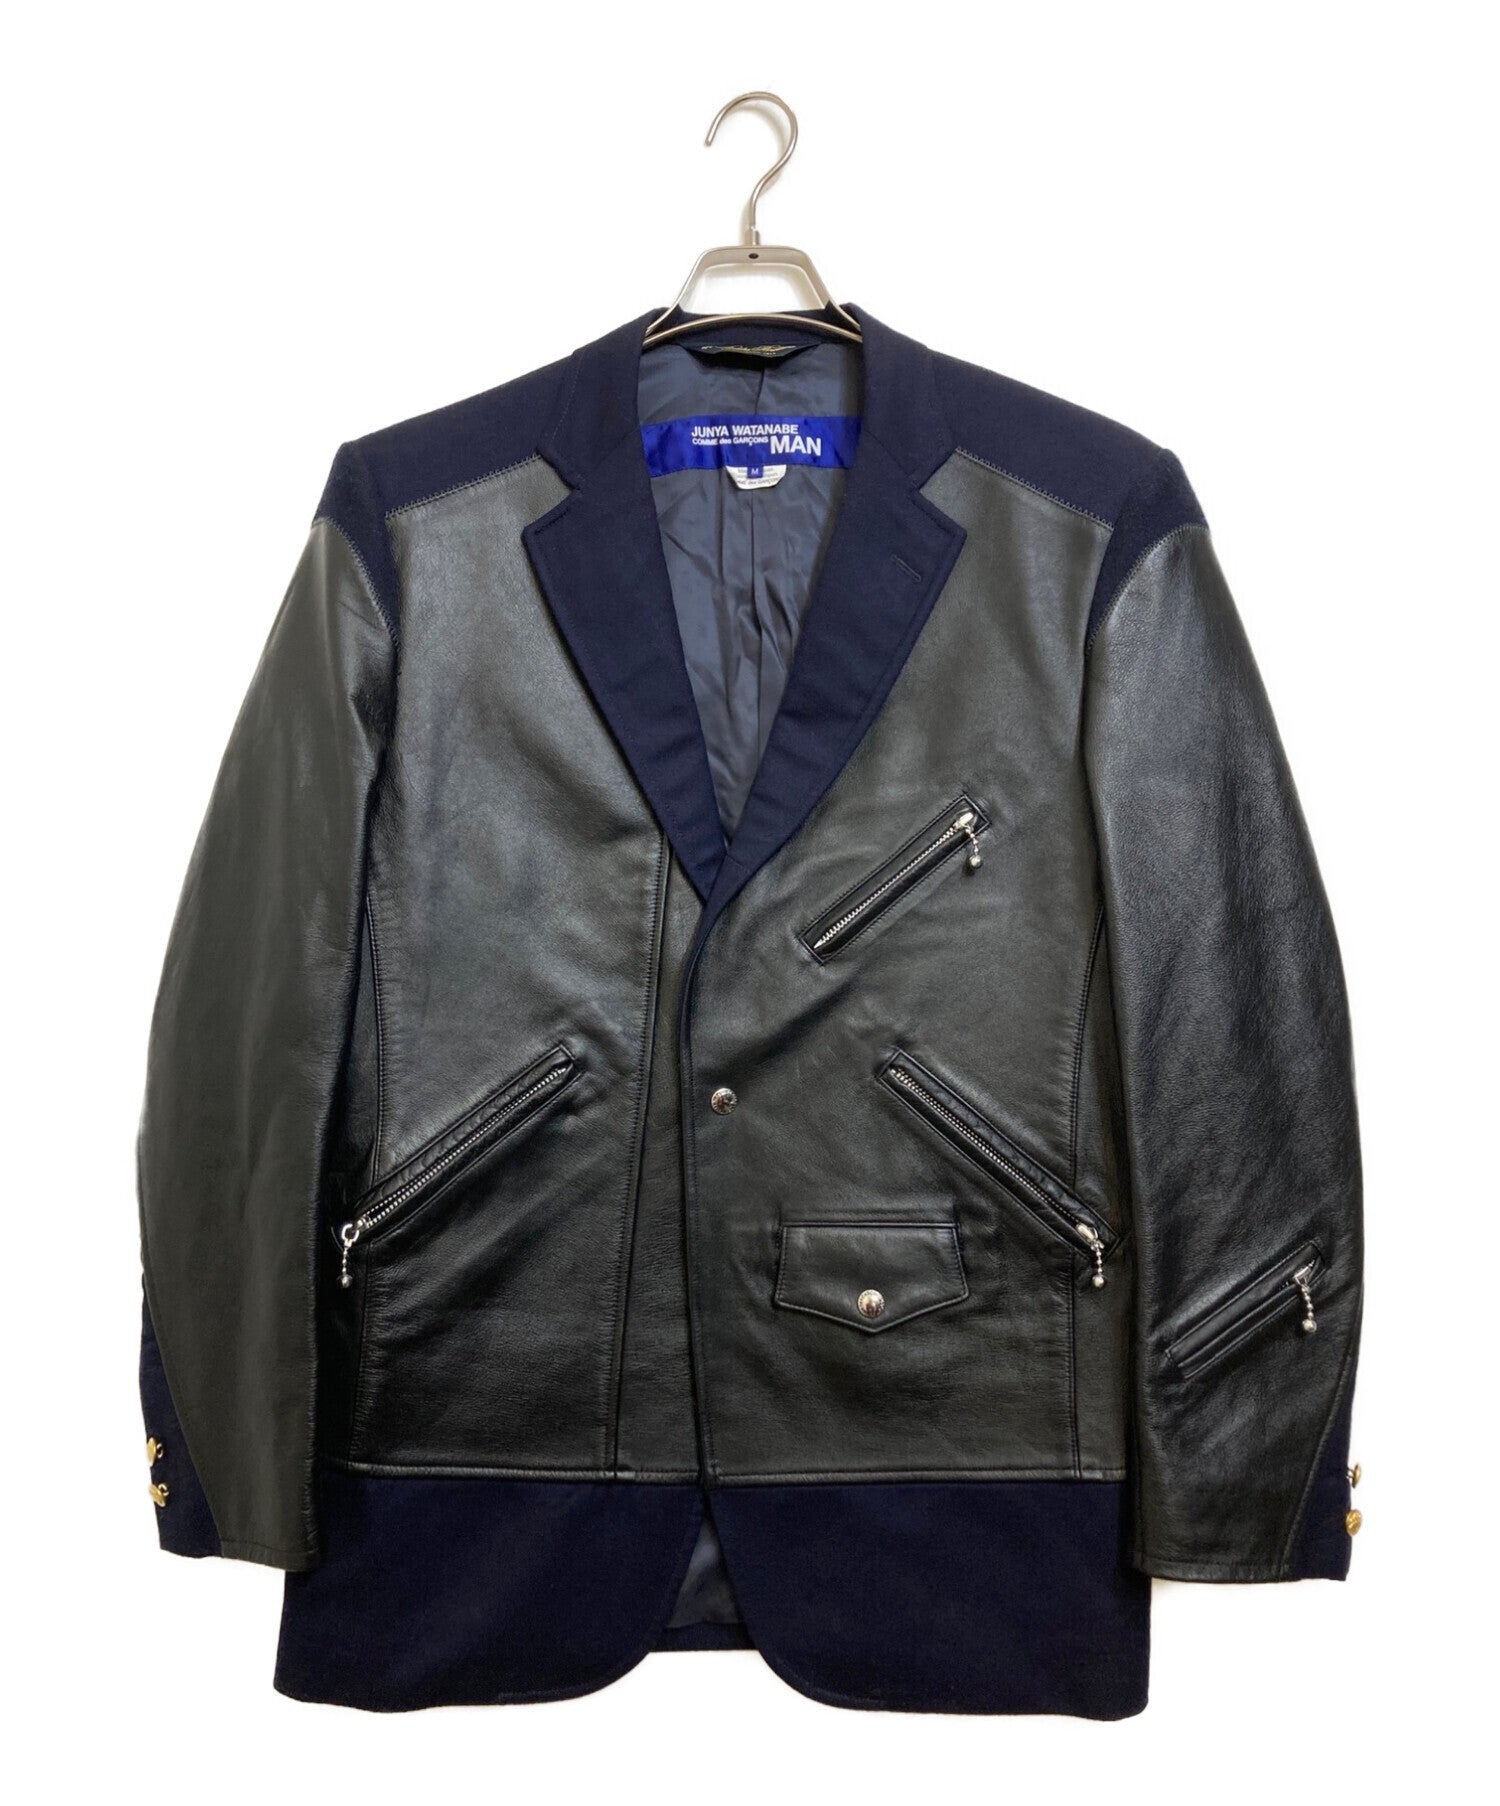 Brooks Brothers x COMME des GARCONS JUNYA WATANABE MAN Riders Docking